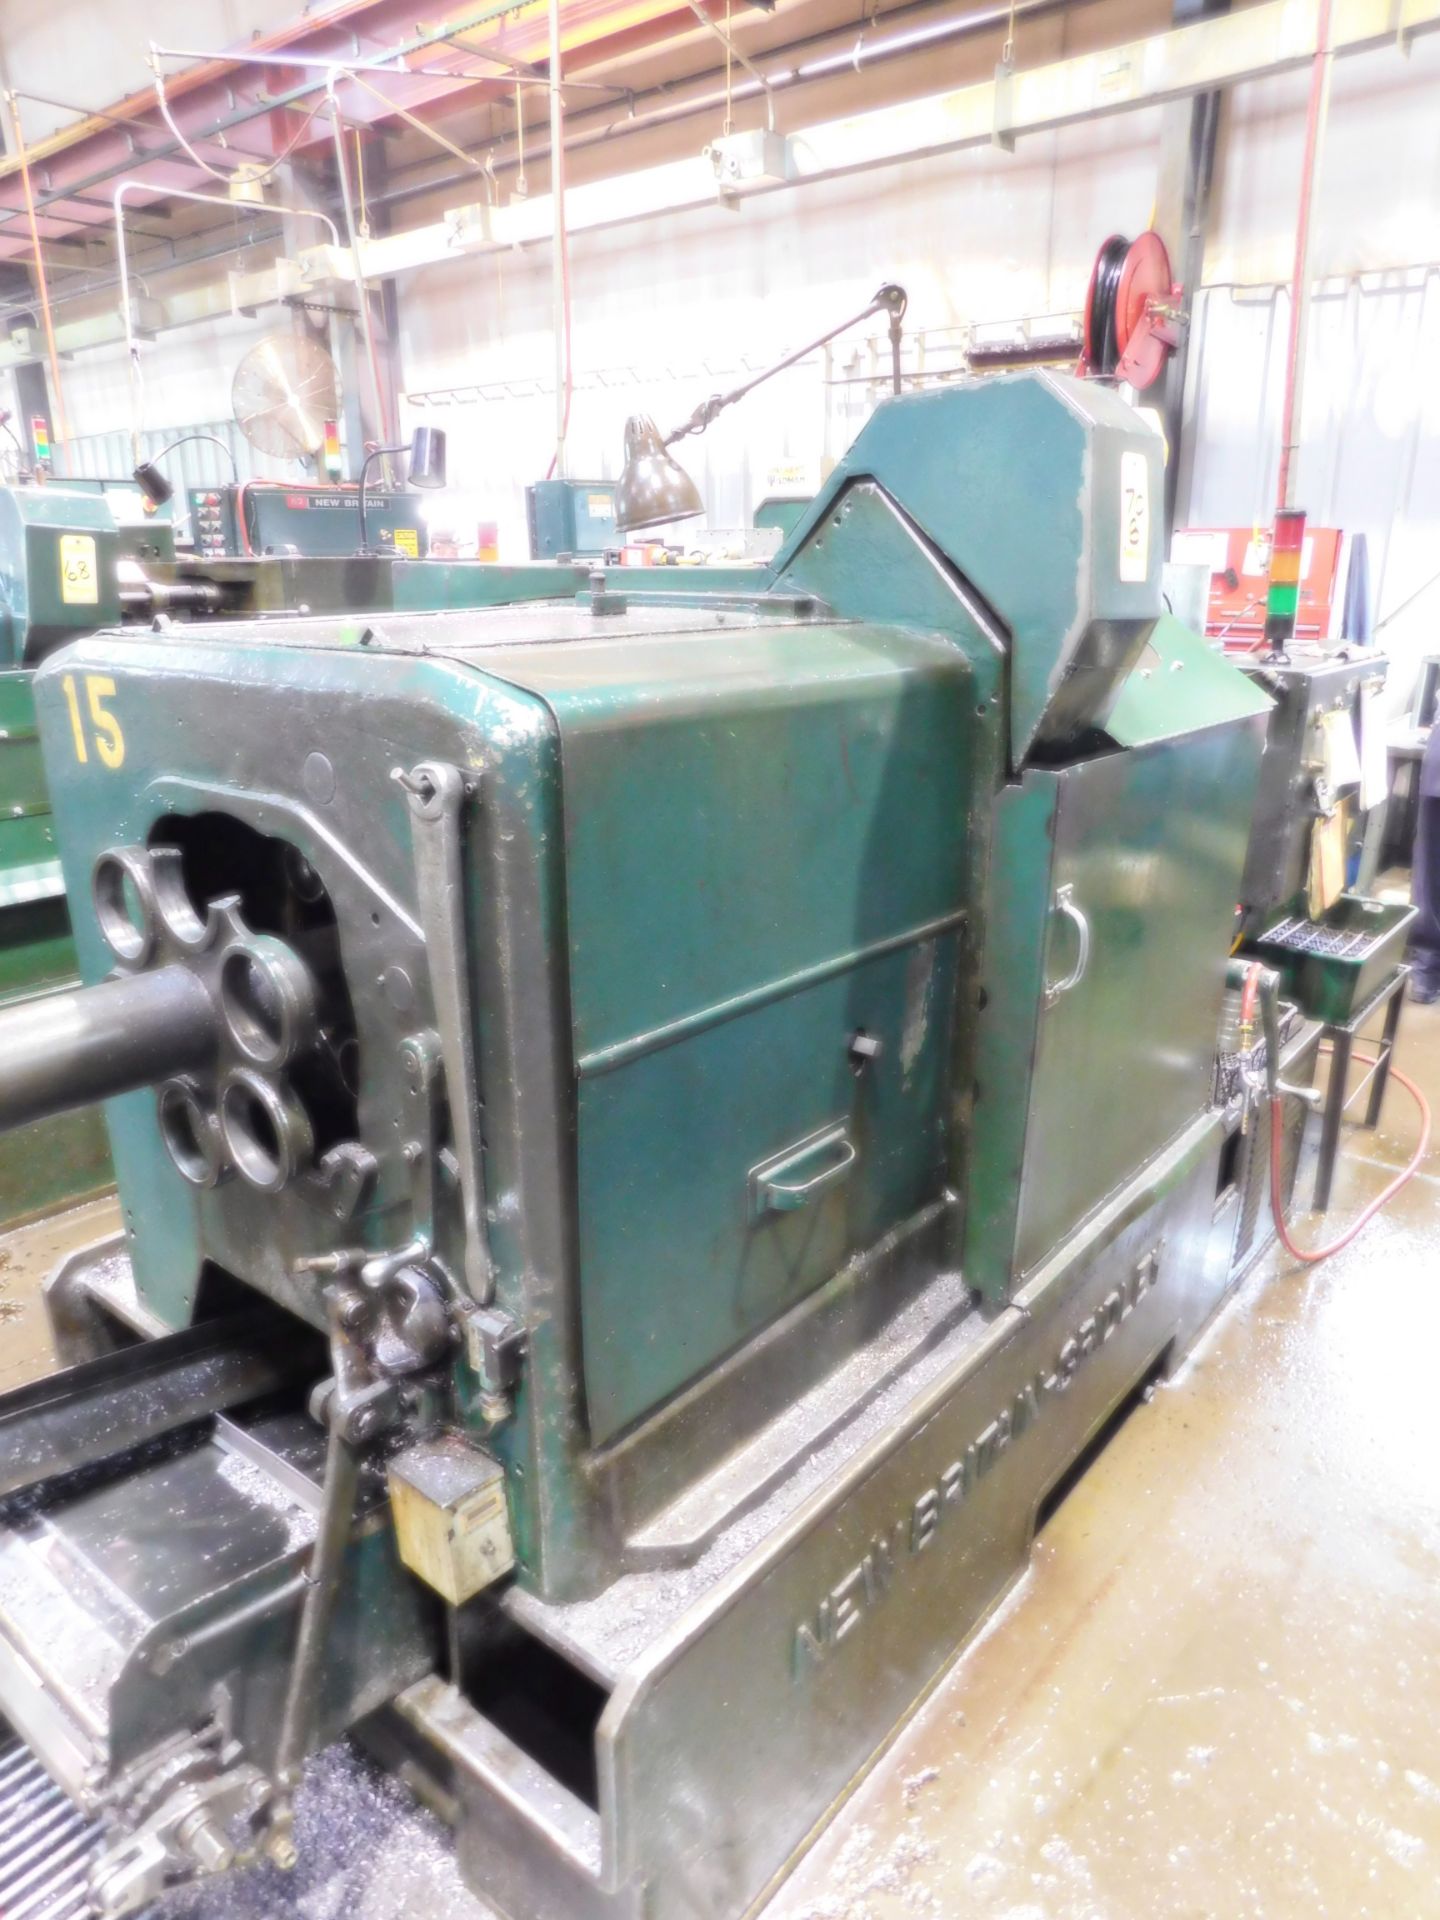 New Britain Model 61 Automatic Screw Machine, s/n 26683, 1 5/8", 6-Spindle, No Change Gears or - Image 6 of 8